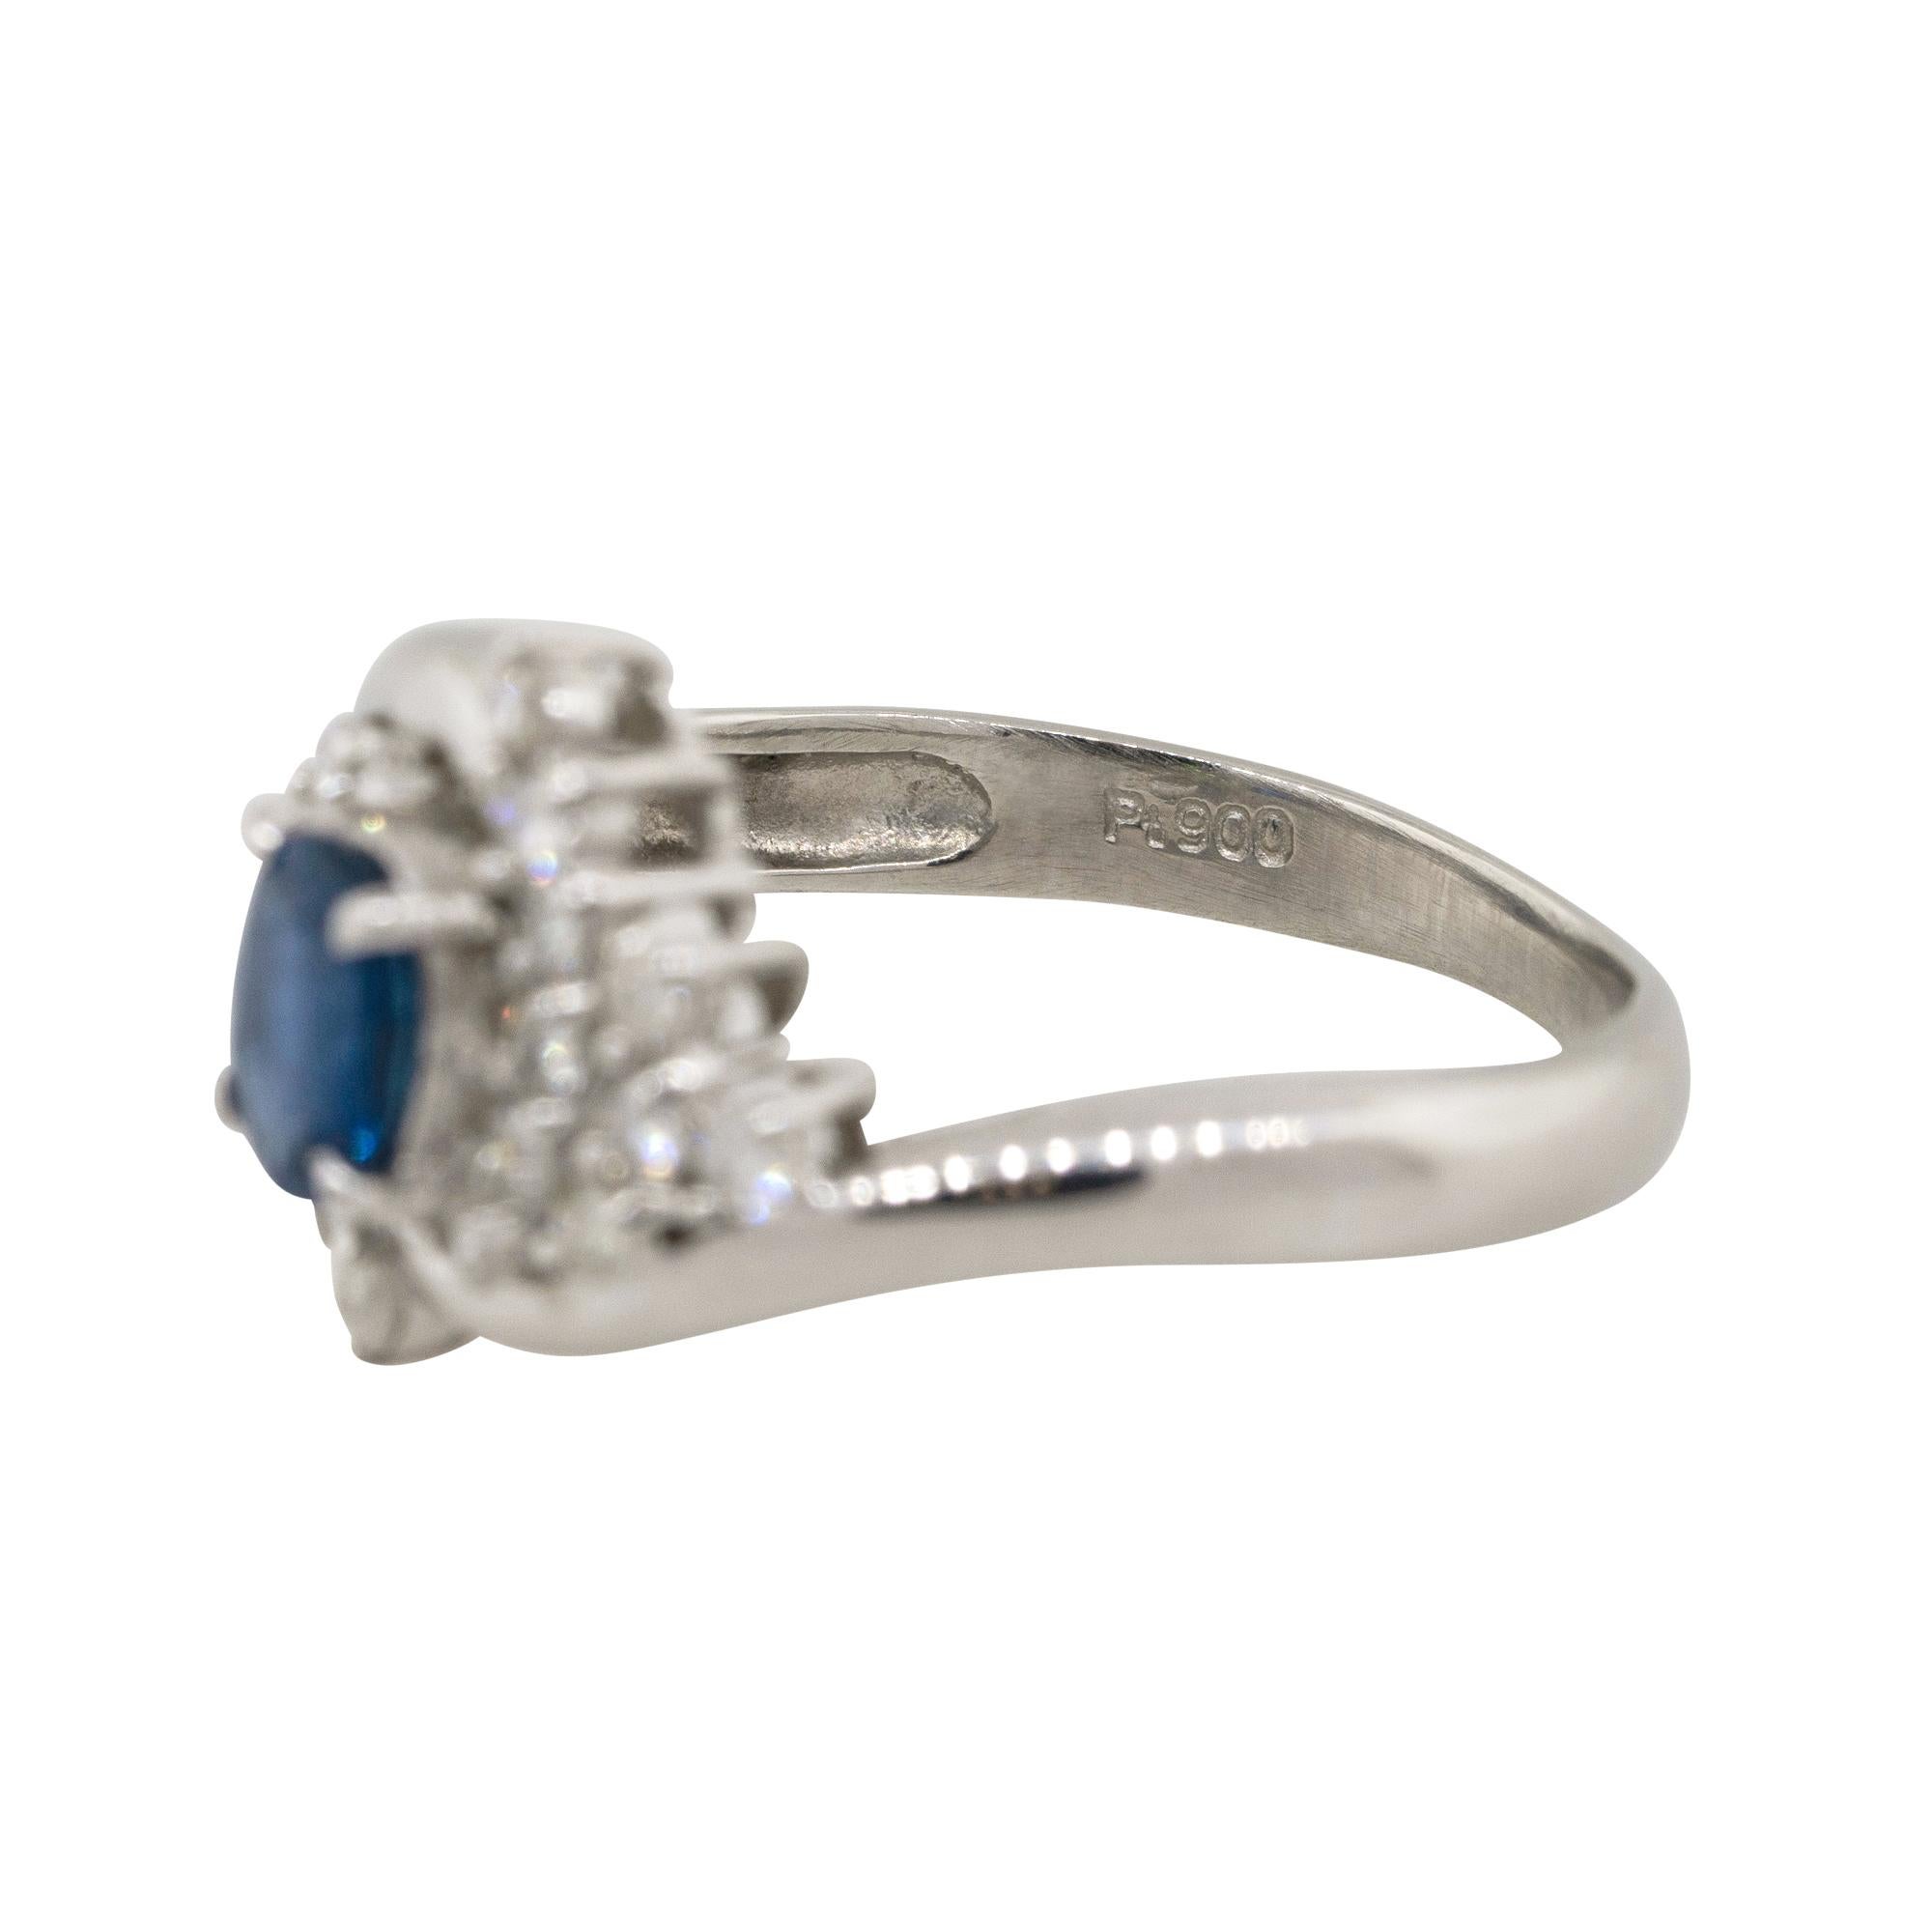 Women's 0.48 Carat Oval Cut Sapphire Diamond Cocktail Spiral Ring in Stock For Sale